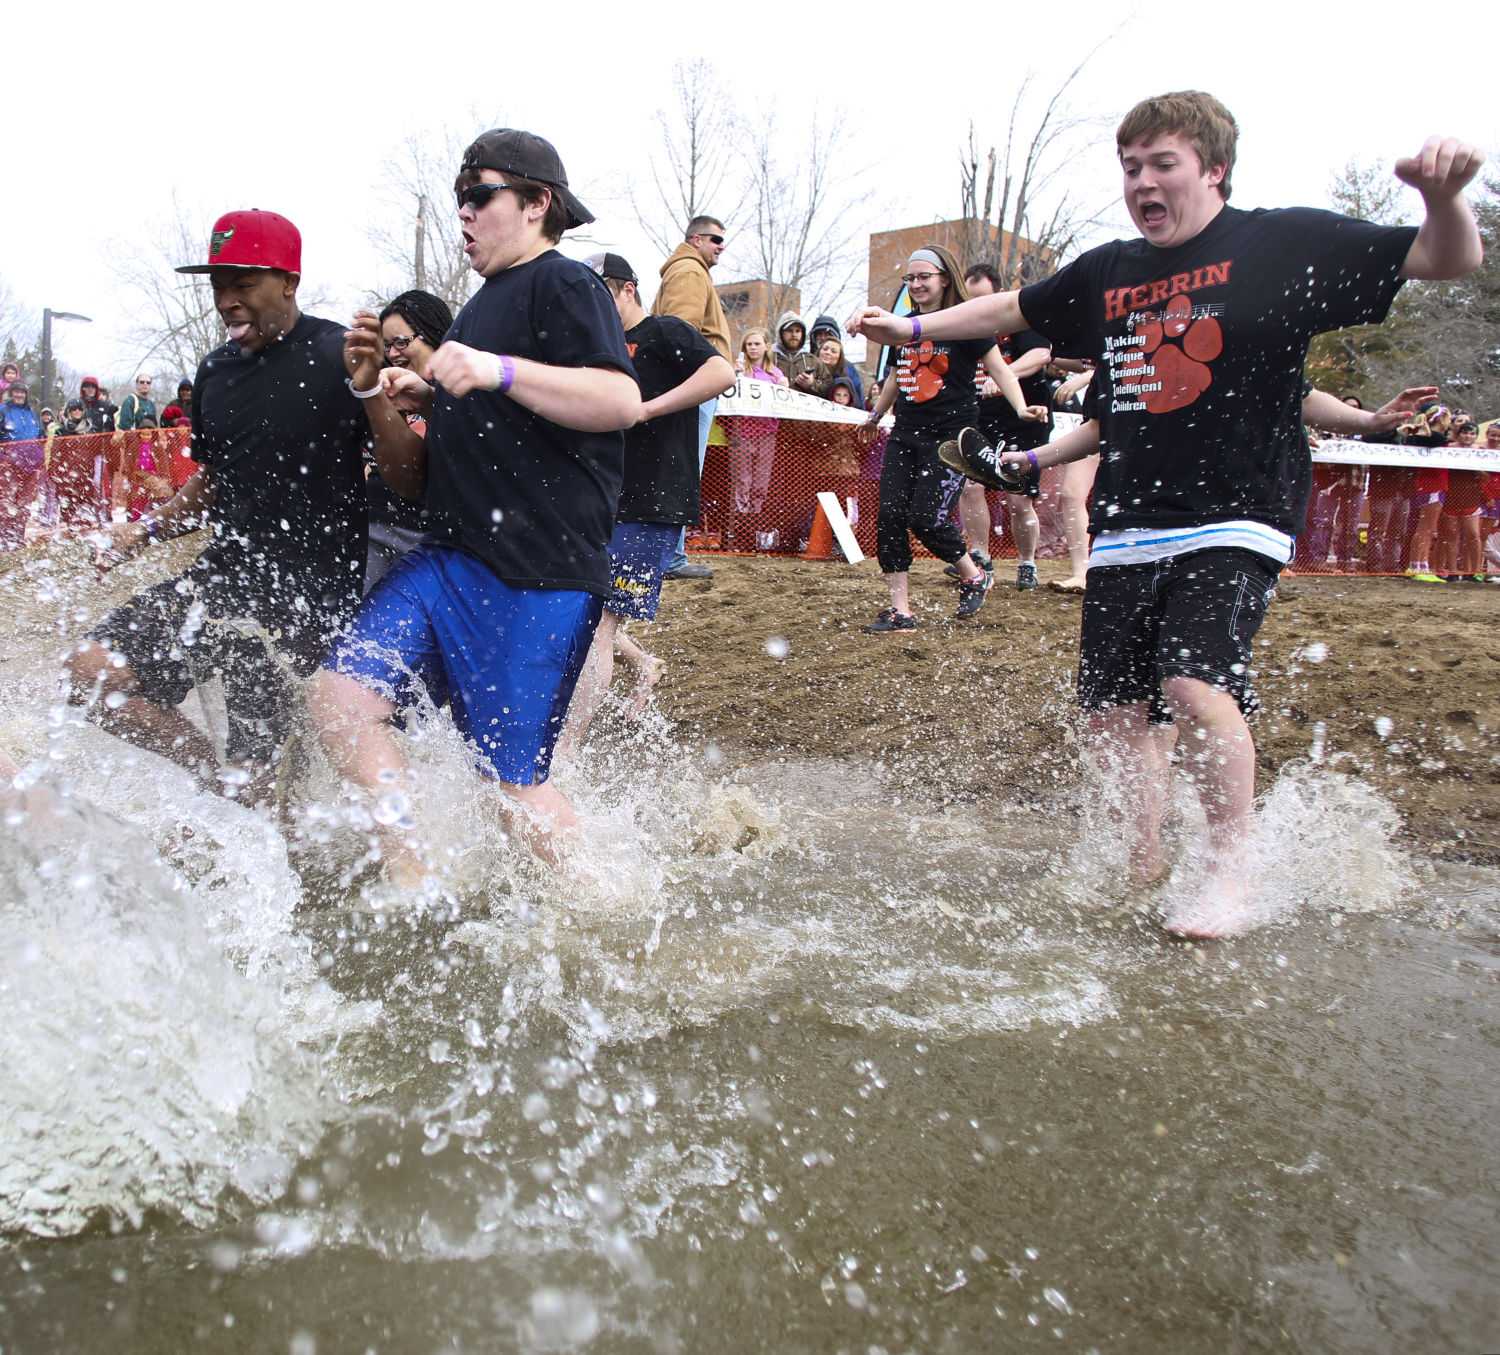 A group of students from Herrin run into Campus Lake on Saturday, Feb. 28, 2015 during the annual Polar Plunge. The event, which benefits the Special Olympics, raised $21,373.94 from 436 participants. (DailyEgyptian.com file photo)